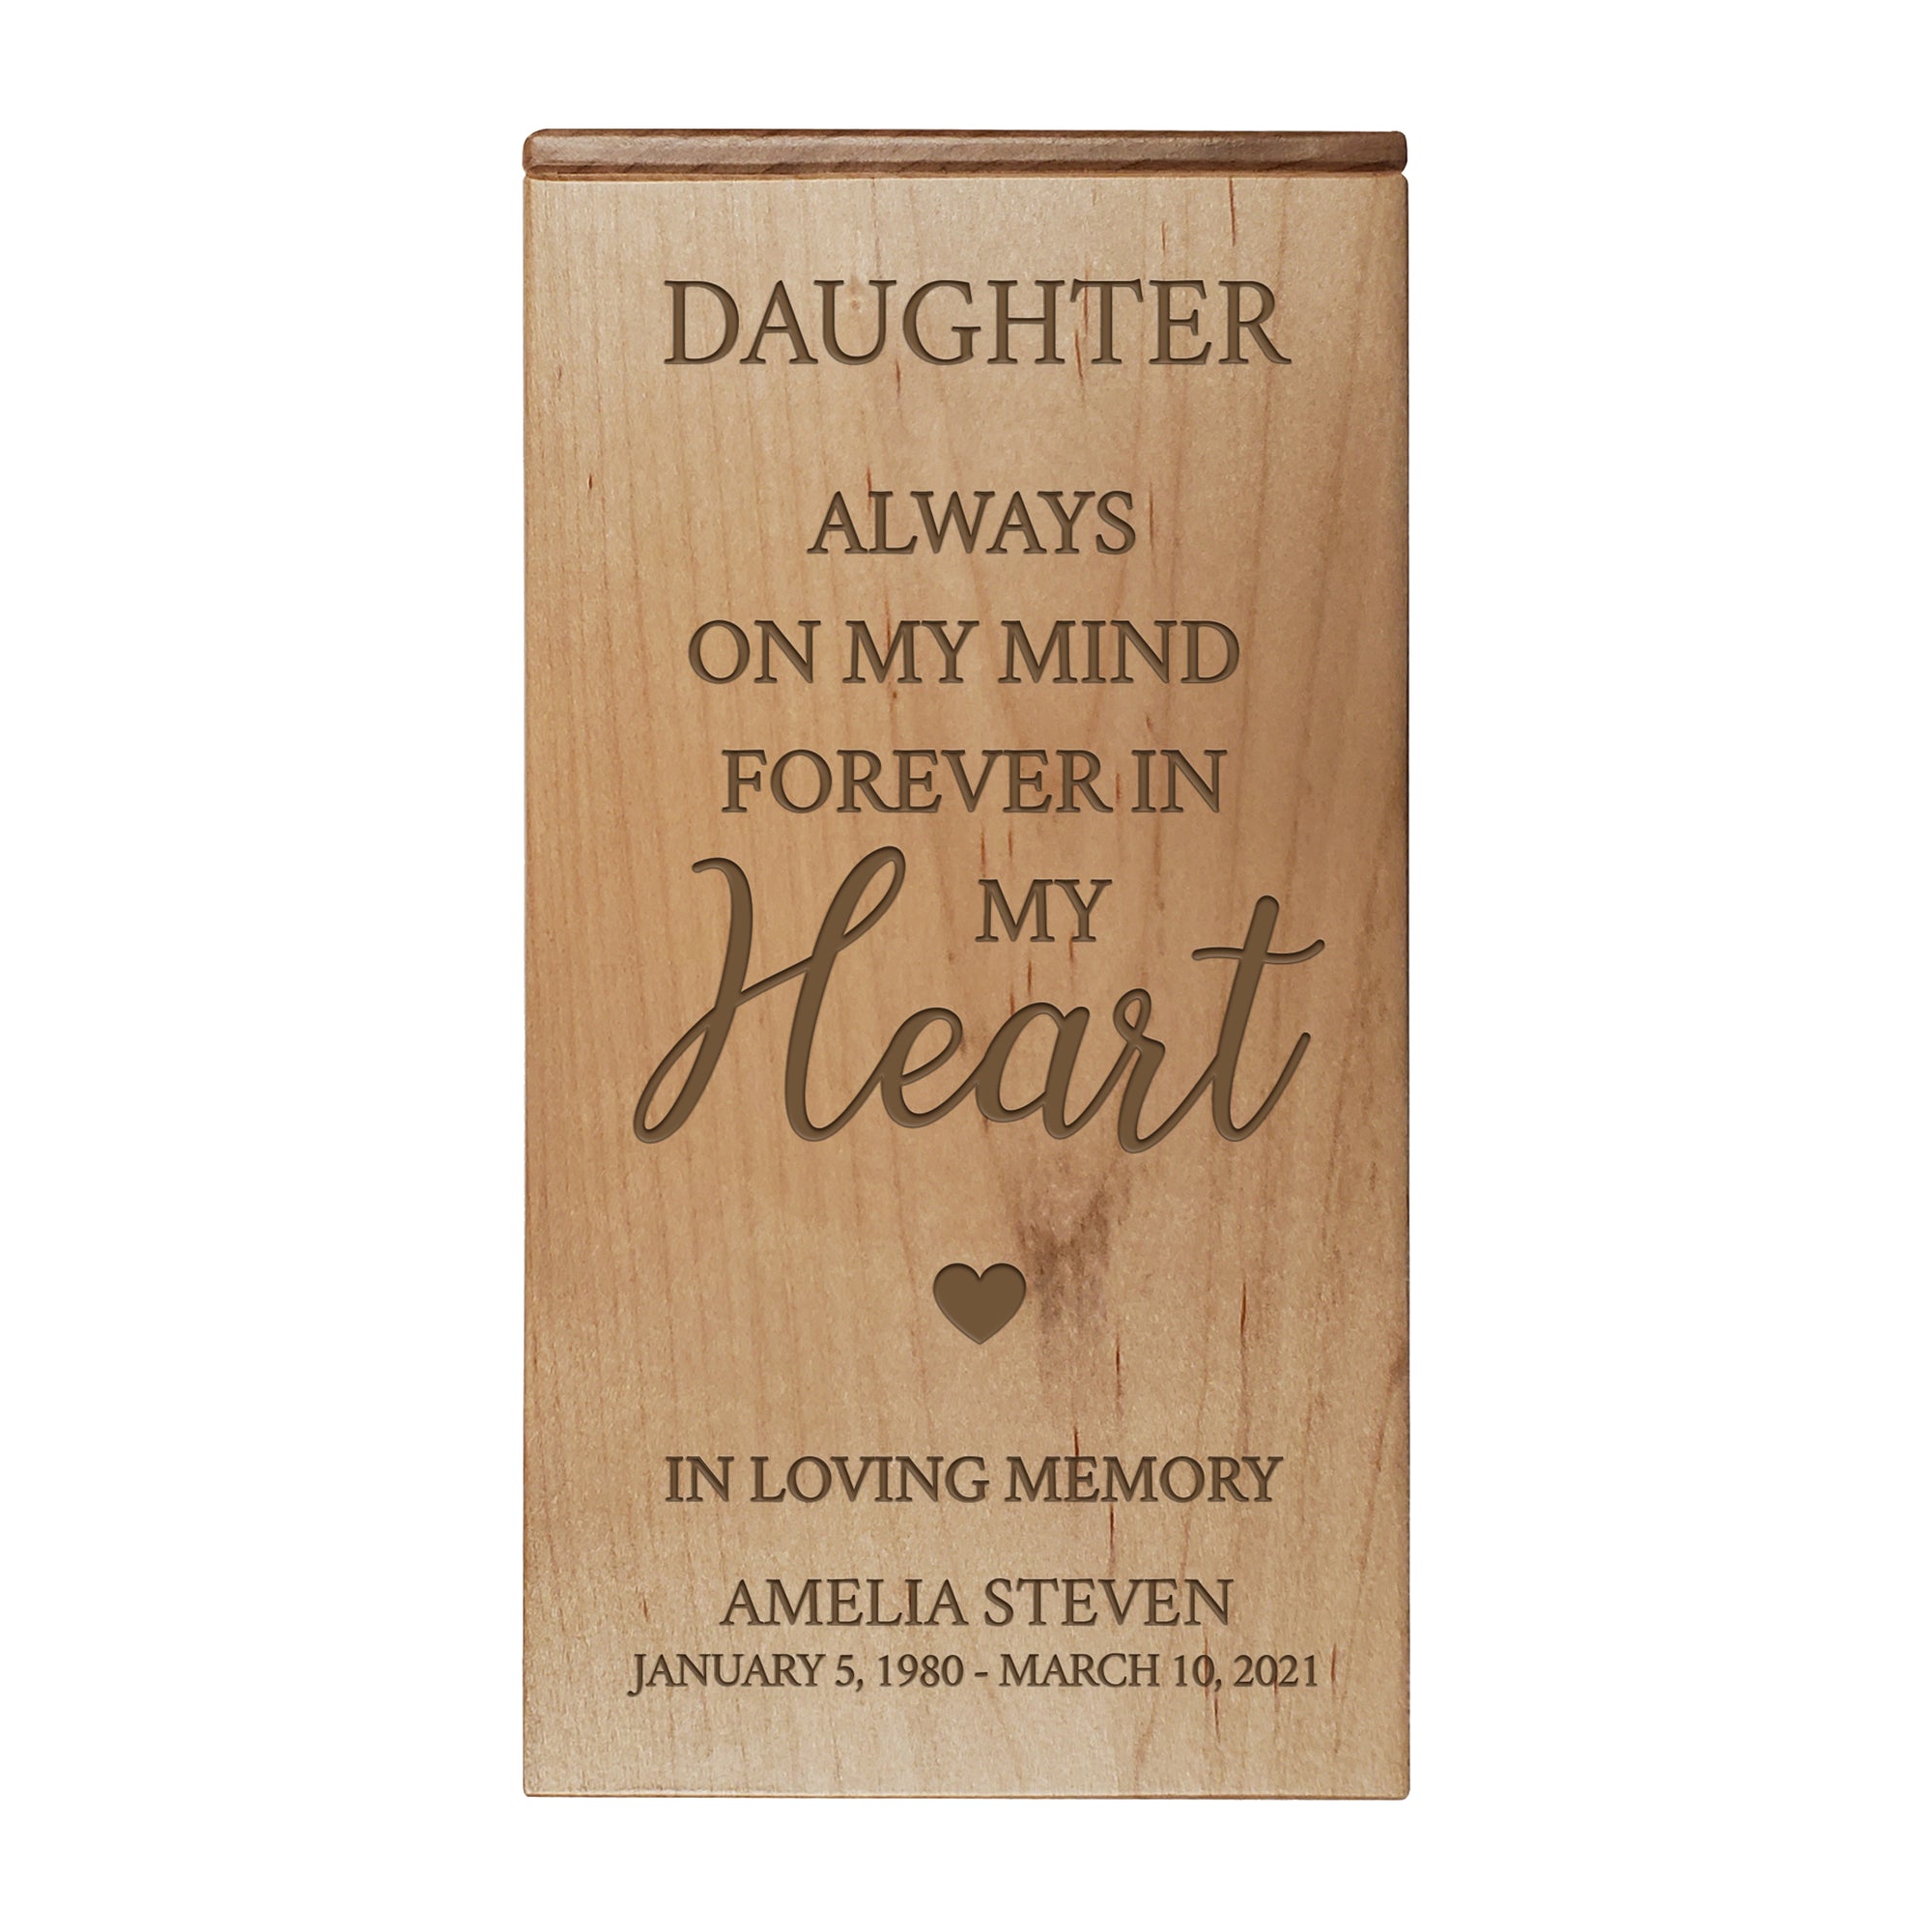 Custom Engraved Memorial Cremation Keepsake Urn Box 4.5x4.5 holds 100 cu in of Ashes in - Daughter, Always On My Mind. Sympathy Gift for the Loss of a Loved One Bereavement Gift for Family Friends Condolence Sympathy Comfort Keepsake Funeral Decoration. Cremation Urns, urn for ashes, urns for humans, urns for dad, urns for mom, urns for sale, urns for human ashes, pet urns, cherished urns, small urns, small urns for ashes, Wooden Urns, Wooden Keepsake Urn, Wood Cremation Urns.